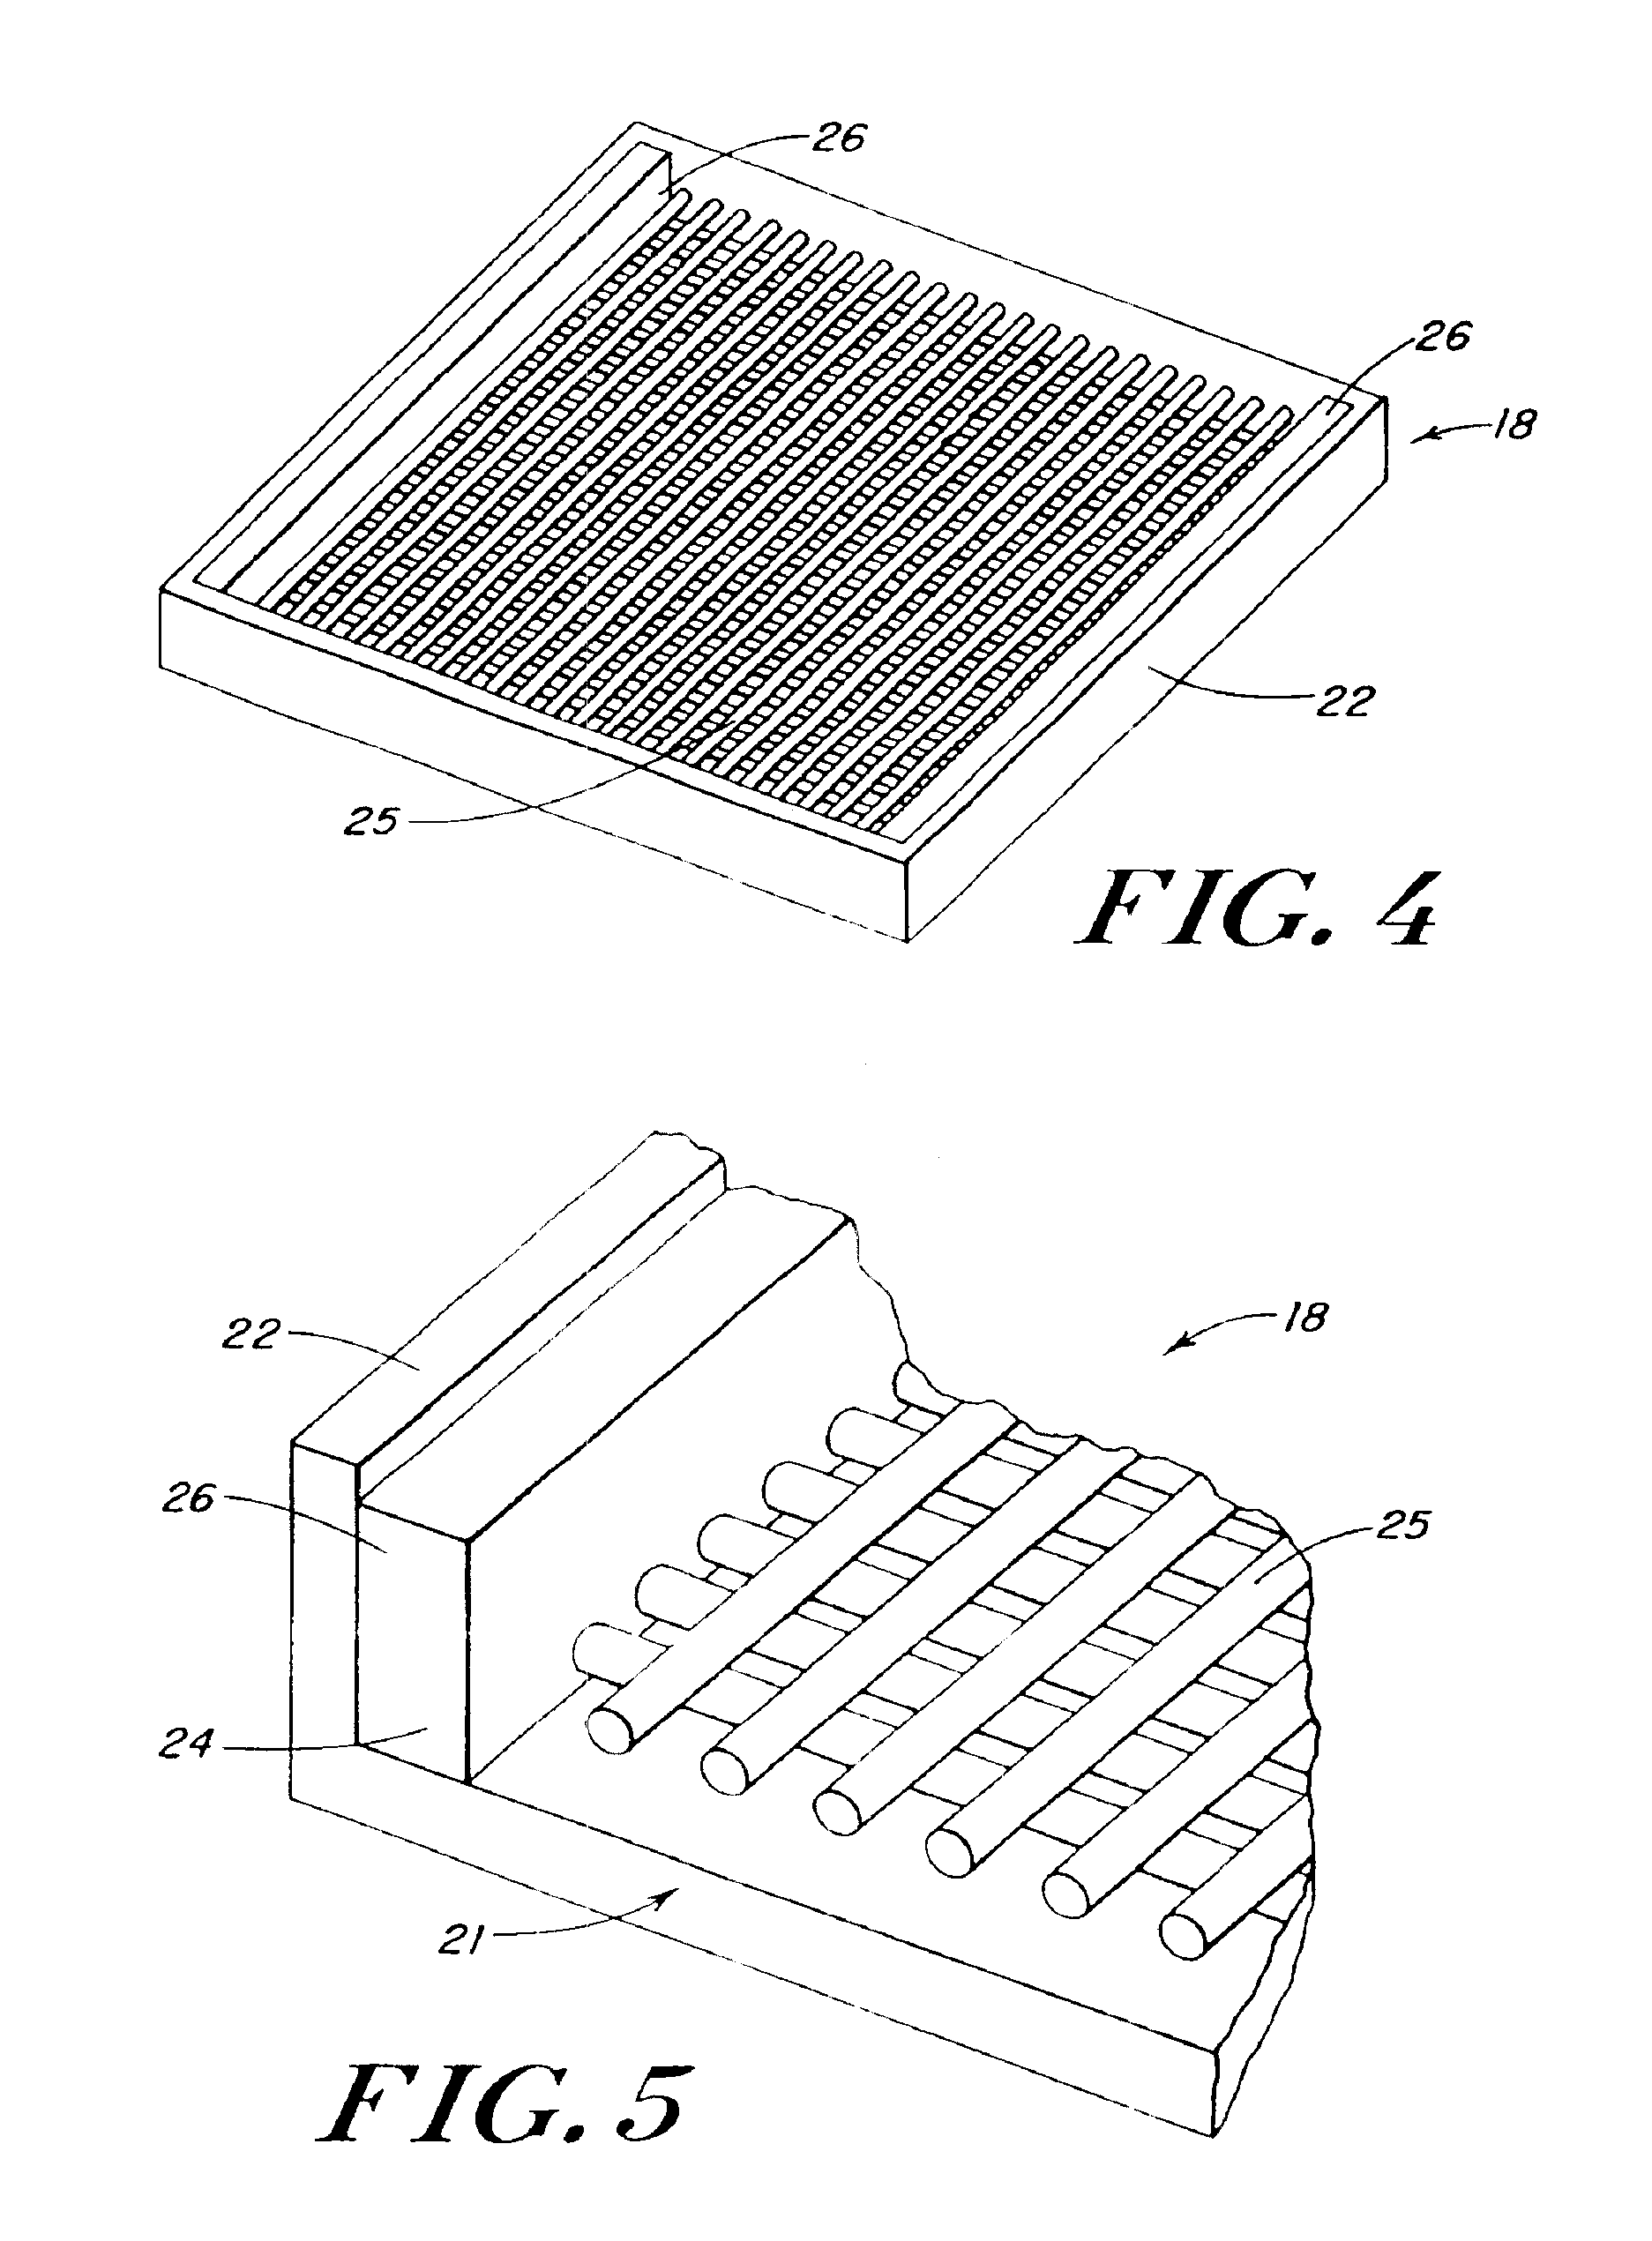 Reinforced foam implants with enhanced integrity for soft tissue repair and regeneration